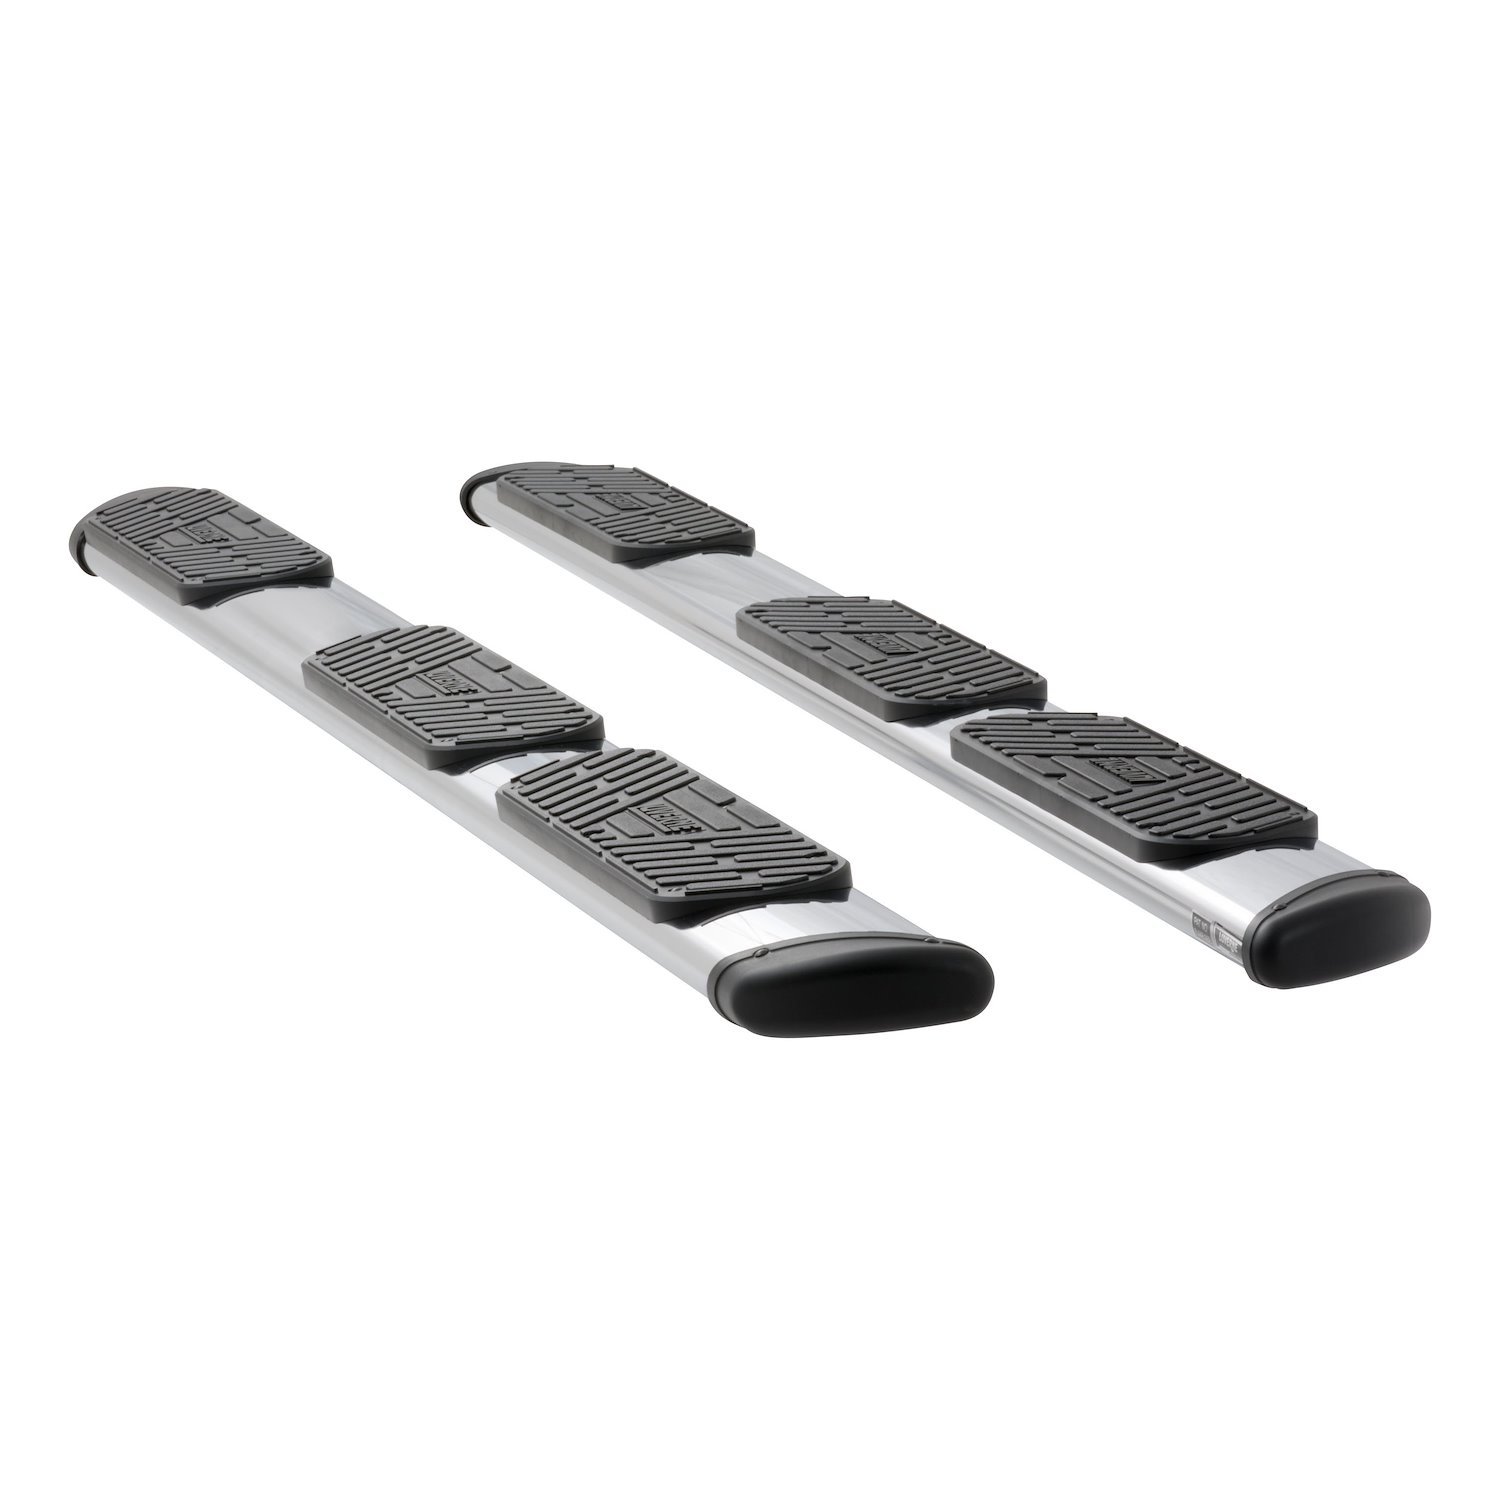 477113-401117 Regal 7 Polished Stainless 113 in. Oval W2W Steps Fits Select Chevy Silverado, GMC Sierra